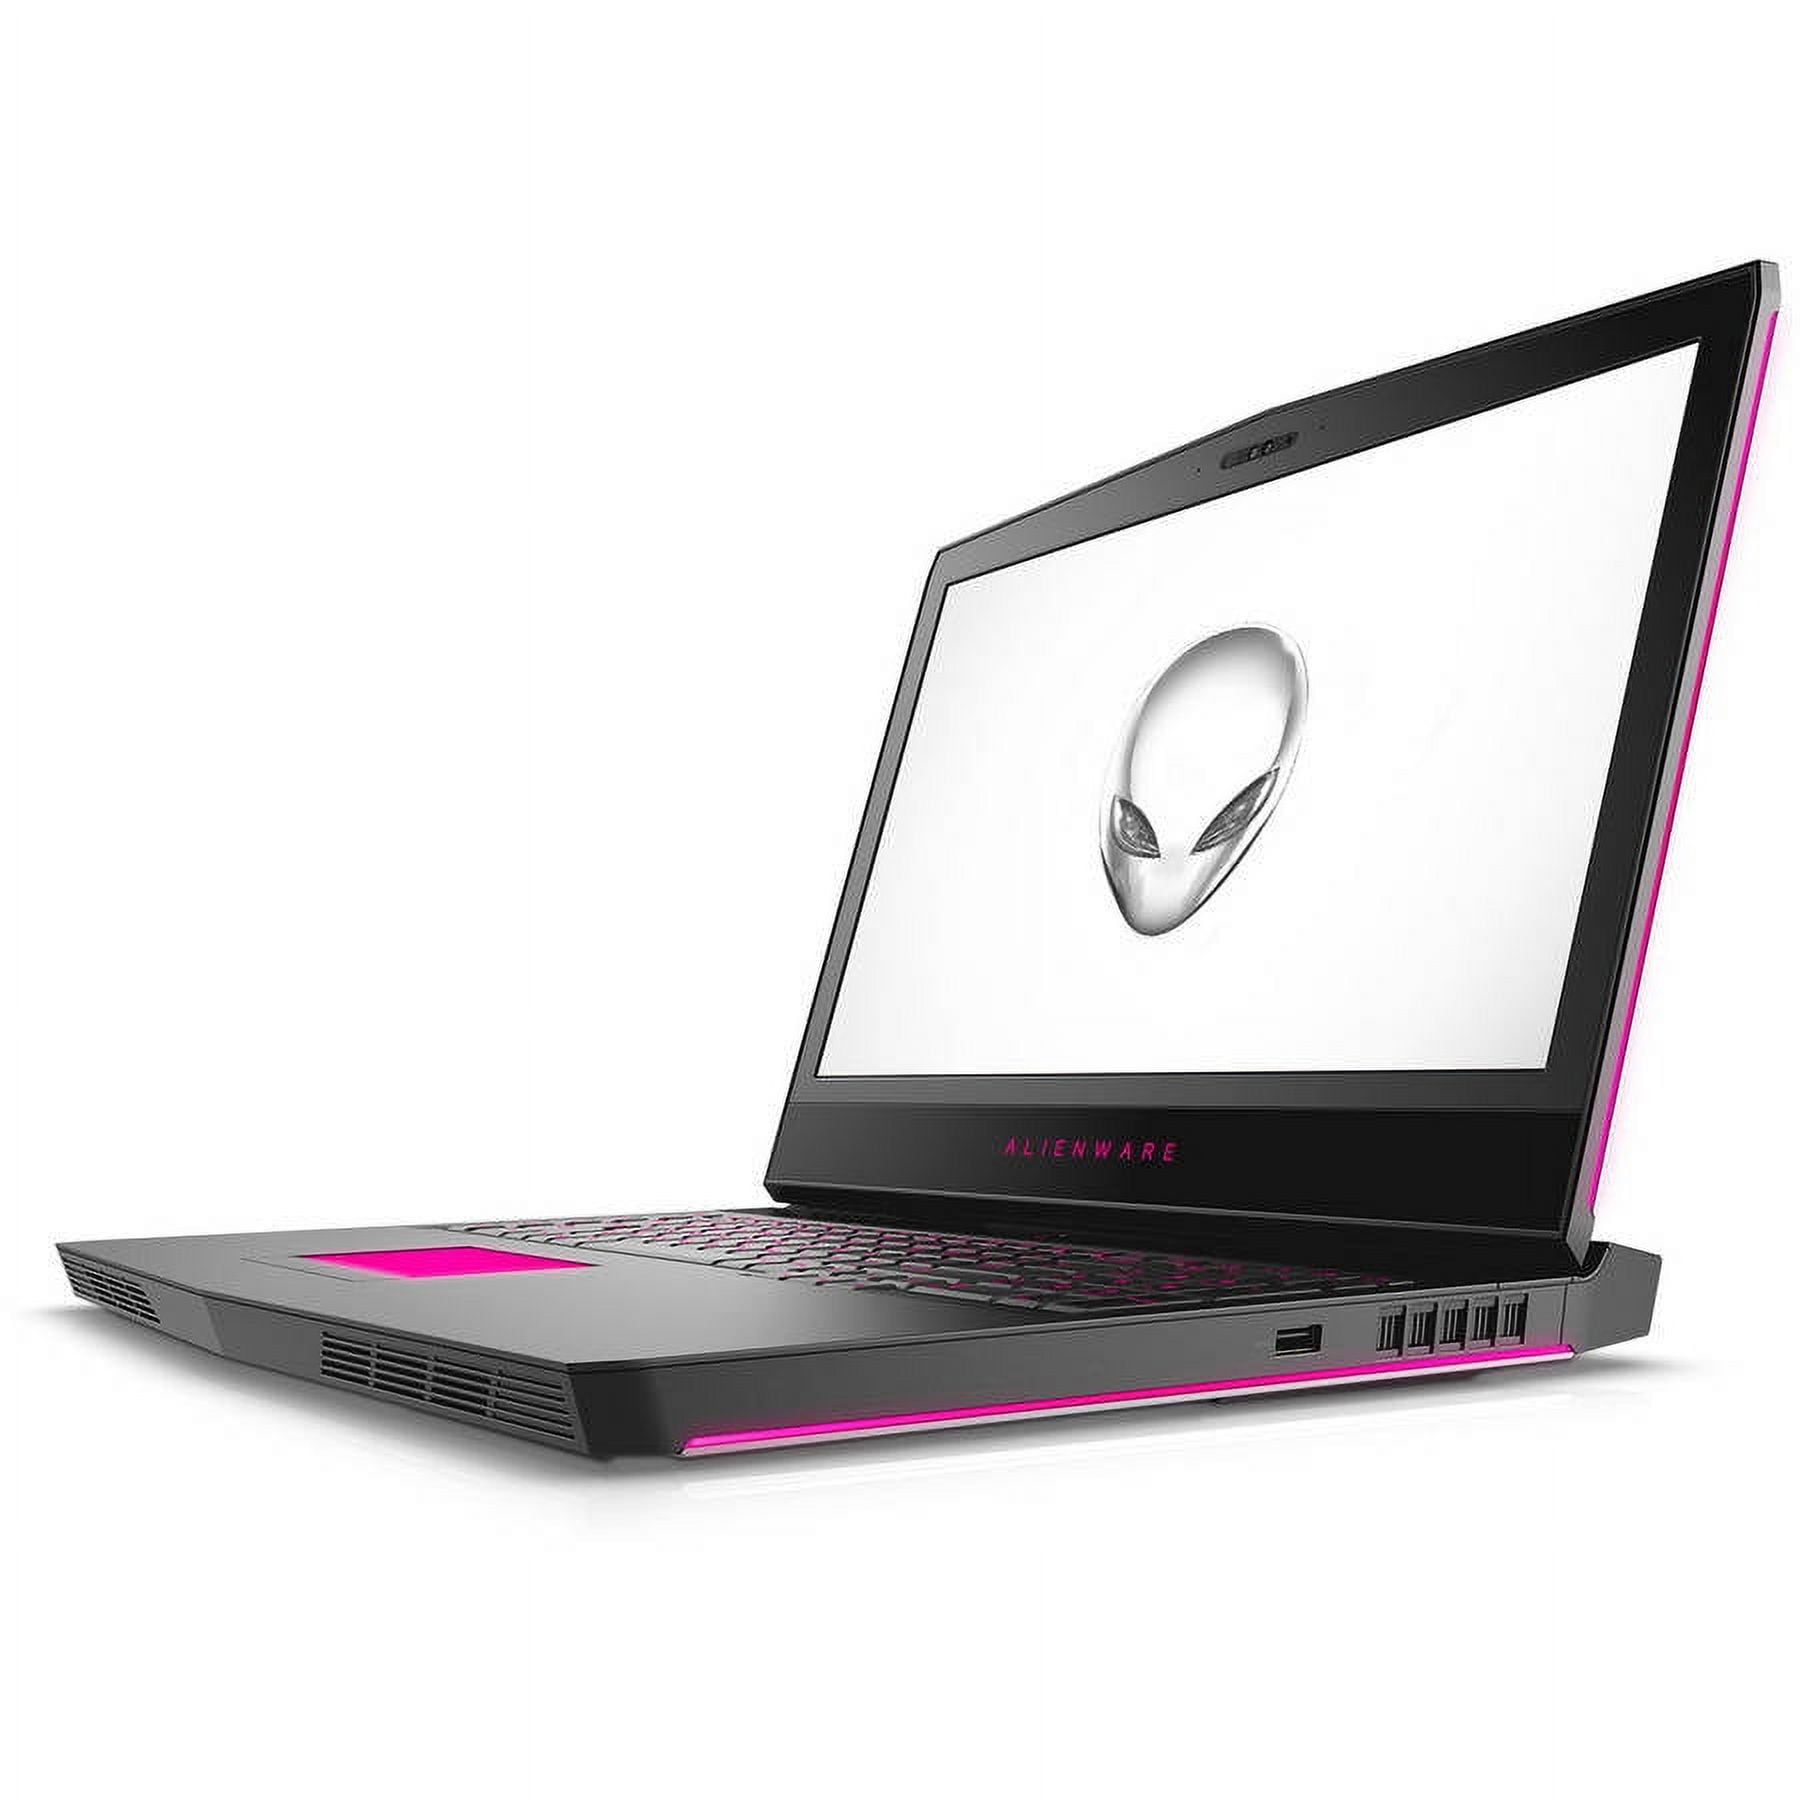 Dell Alienware 17 Gaming Notebook, 17.3 QHD Display, Intel Core